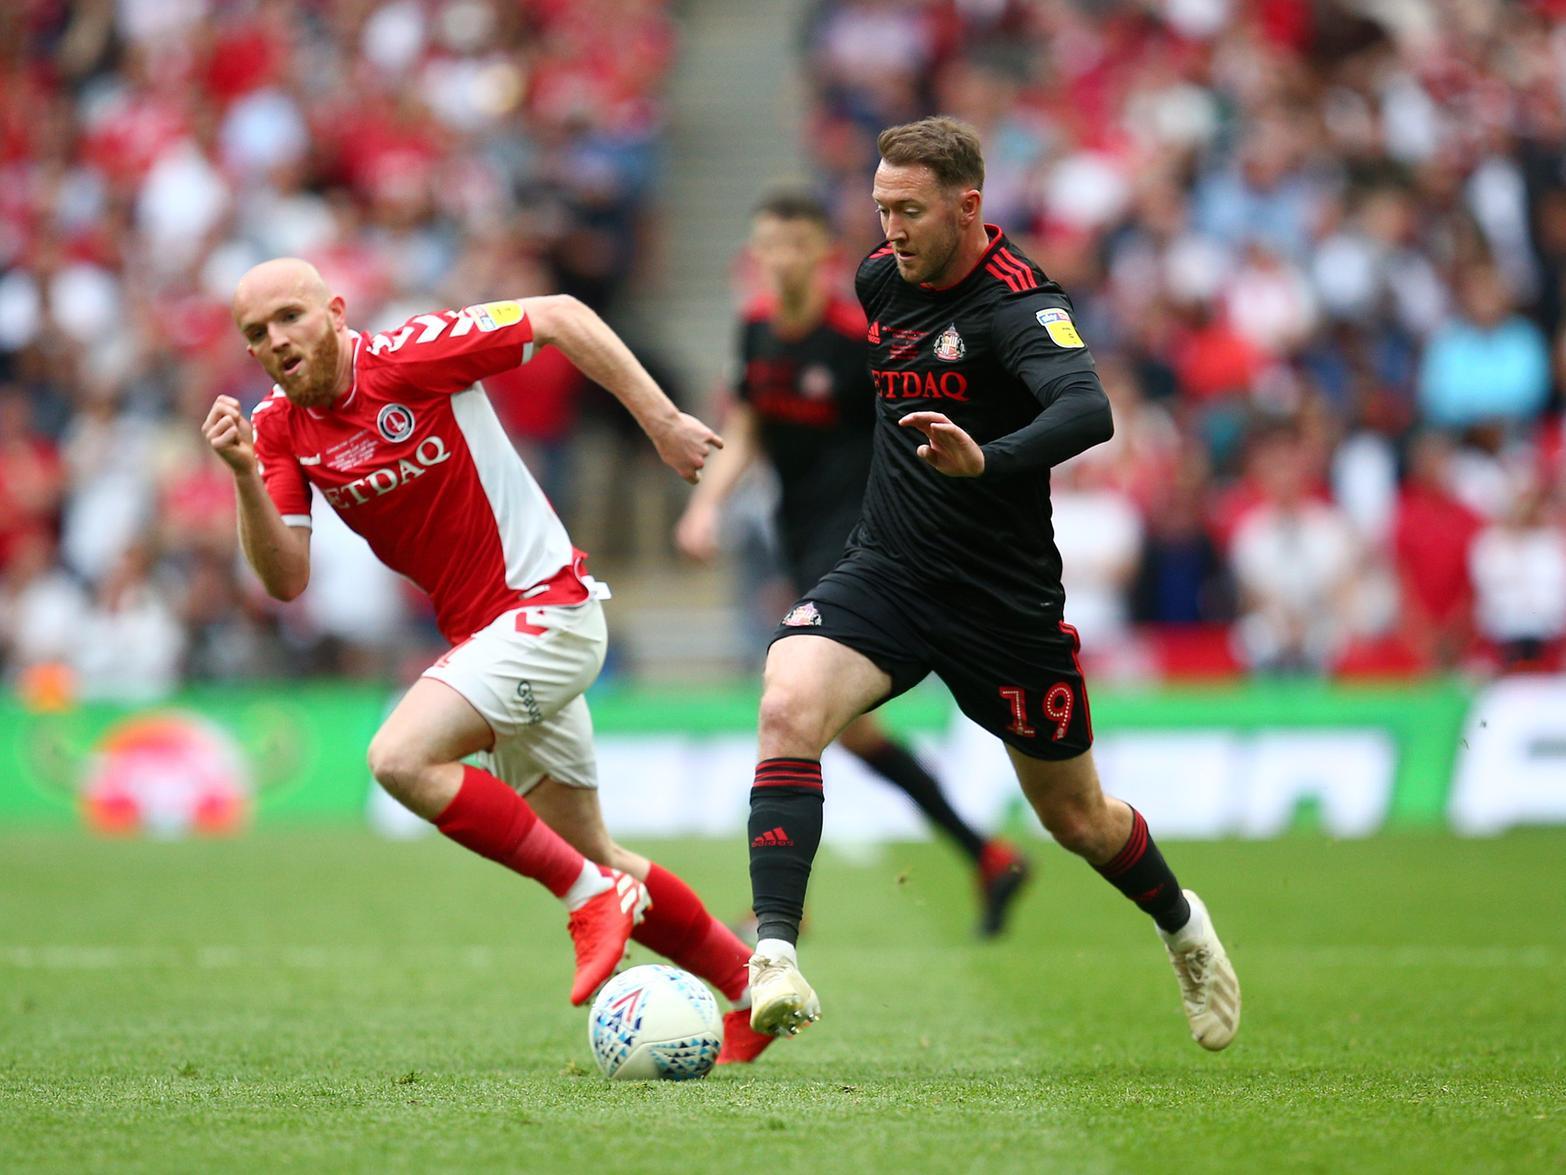 Sunderland winger Aiden McGeady has been linked with a move to Hibernian, the Black Cats reportedly want 10,000 a week towards the ex-Celtic mans wages. (The Sun)